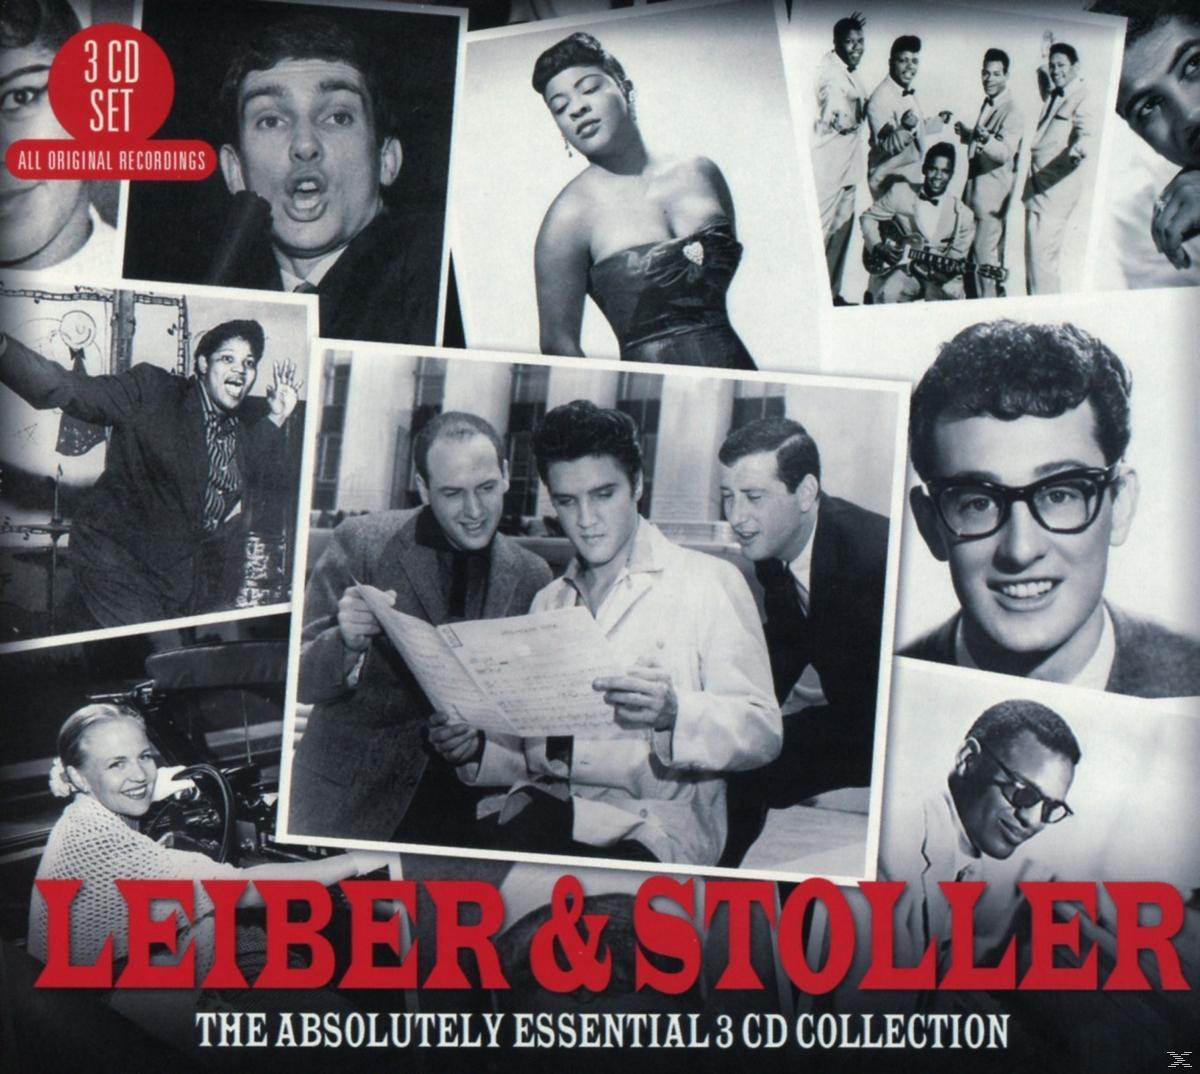 The - Stoller Absolutely Essential 3 (CD) Collection - & Cd Leiber